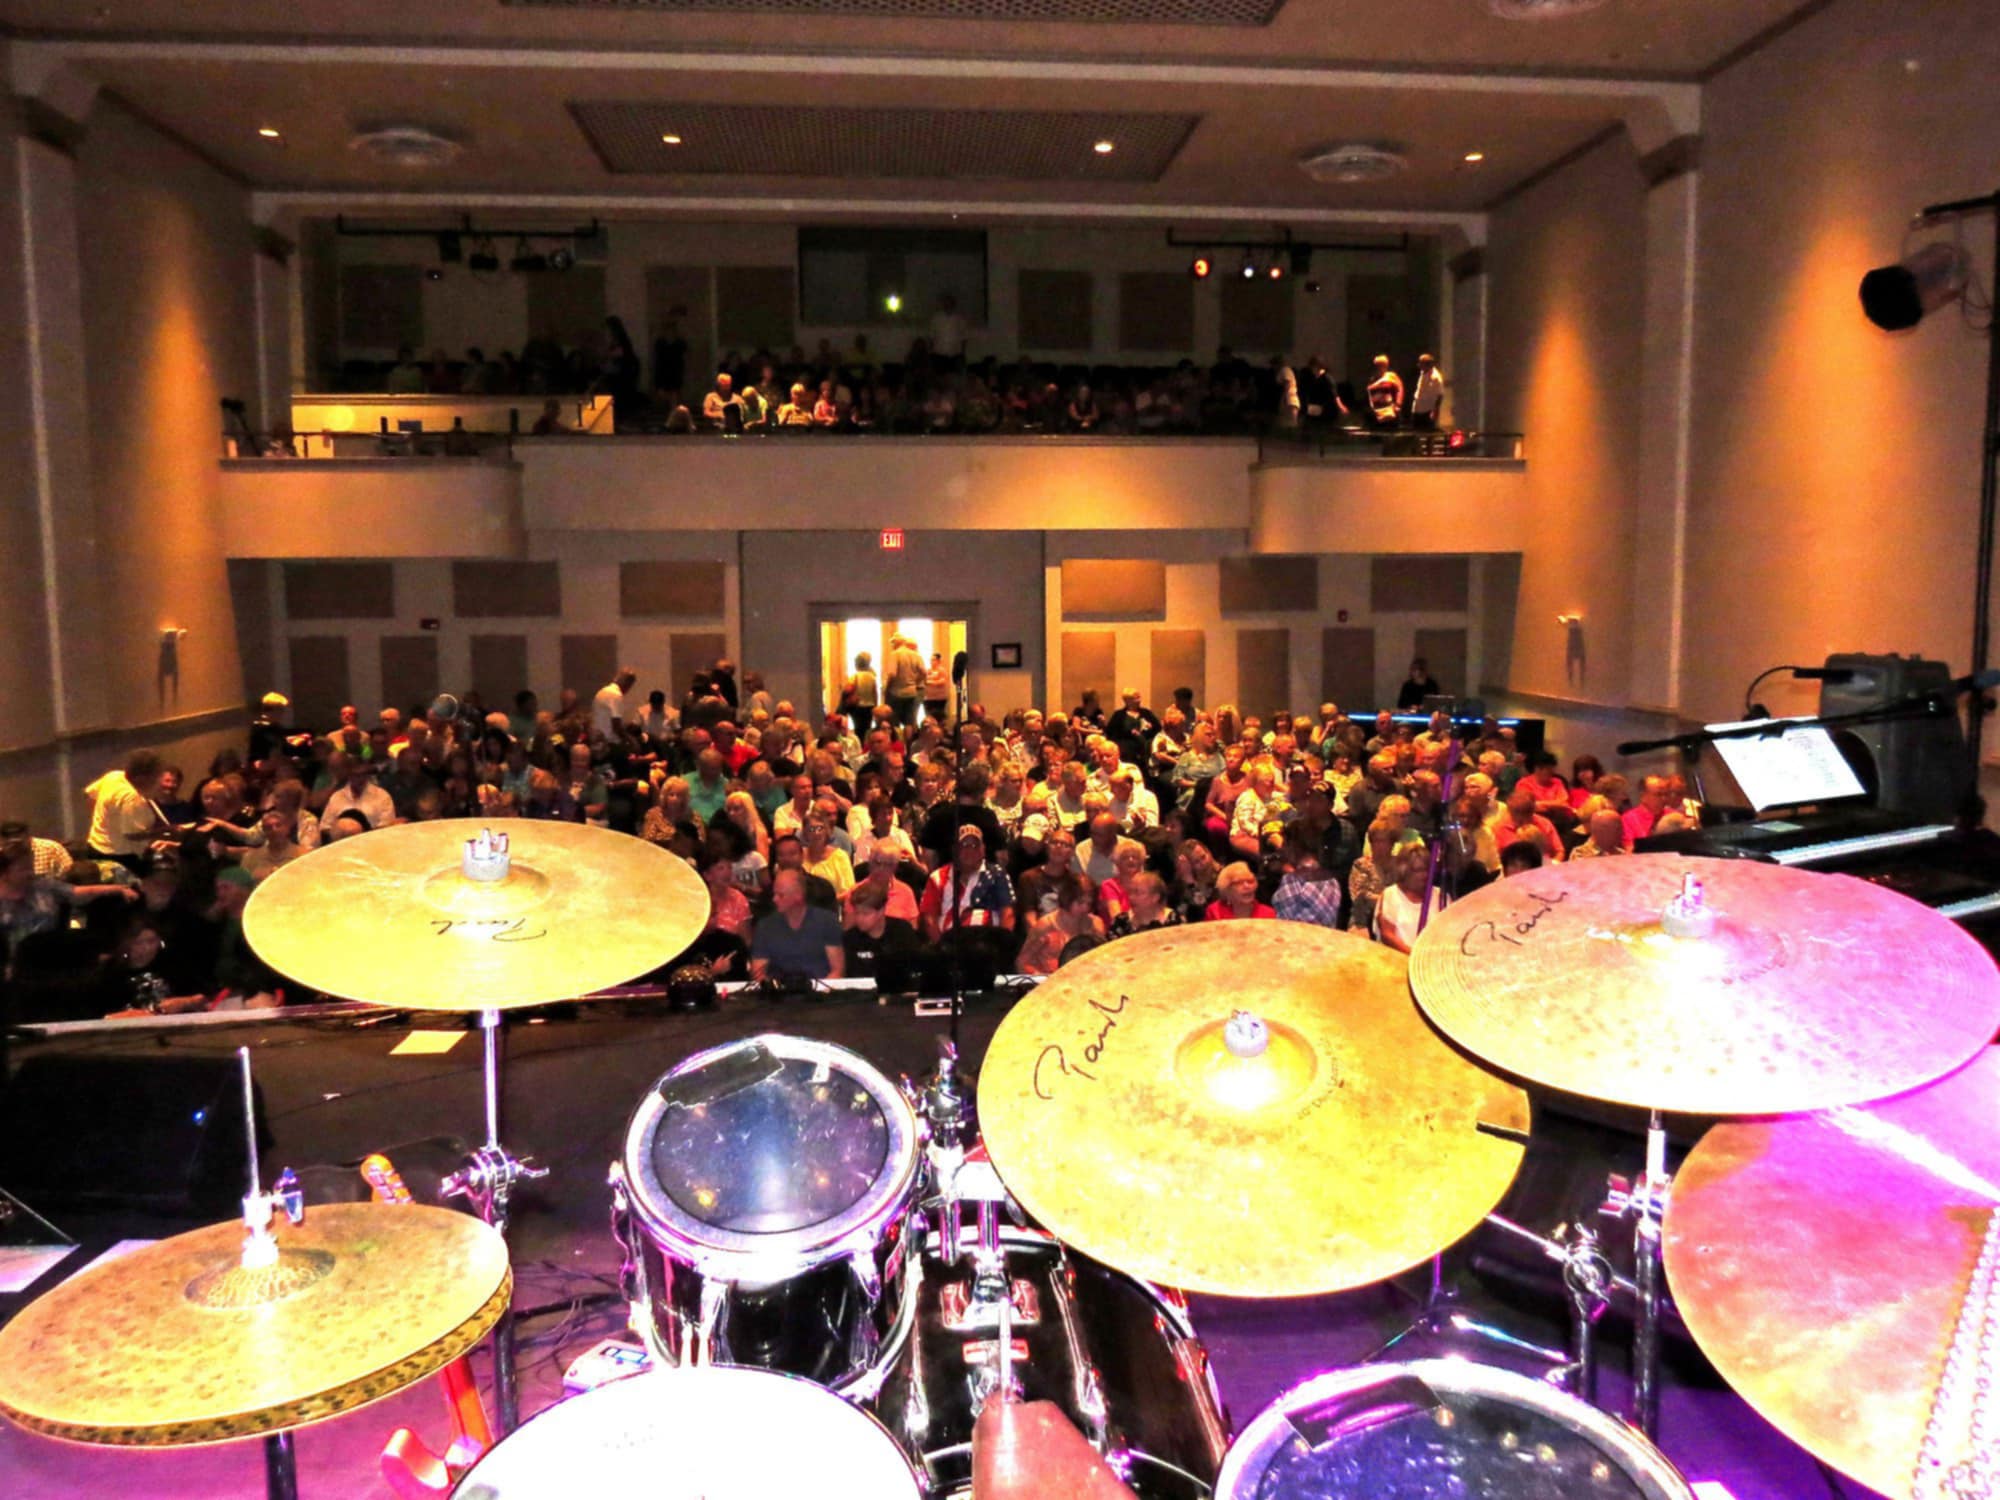 Audience during a concert at Ramon Theater in Frostproof, FL